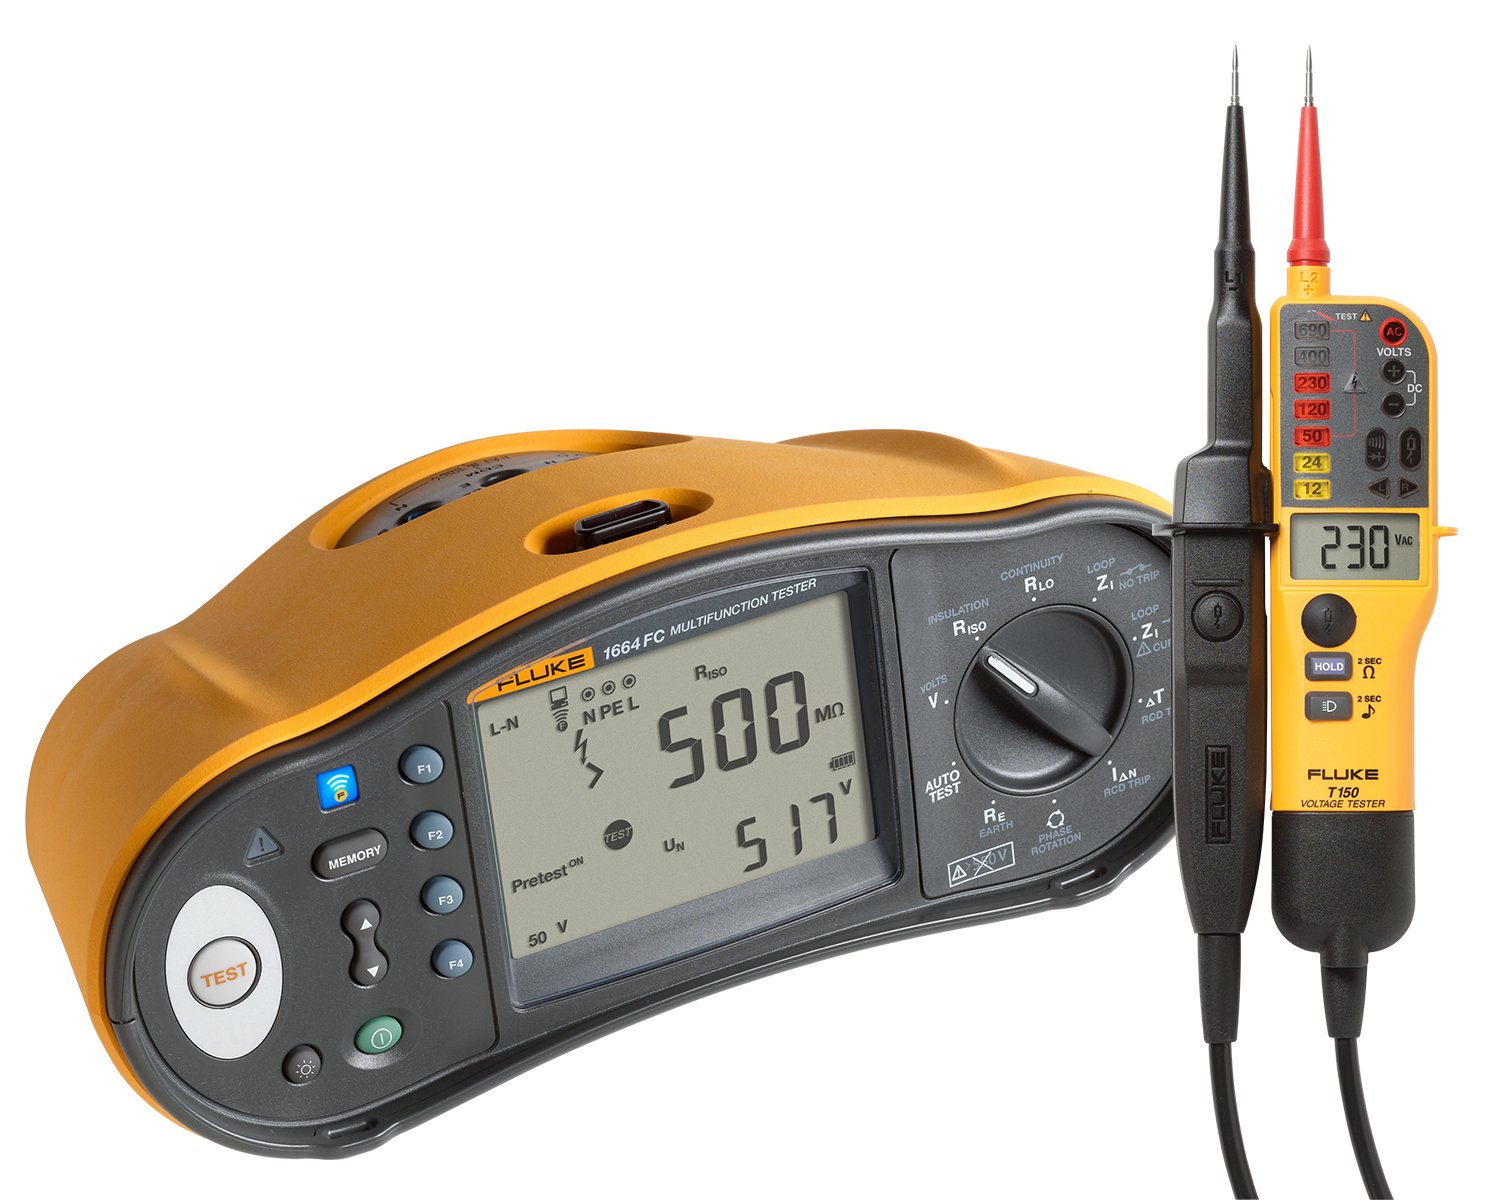 Fluke 1664 FC Multifunction Installation Tester plus a T150 Electrical Tester.